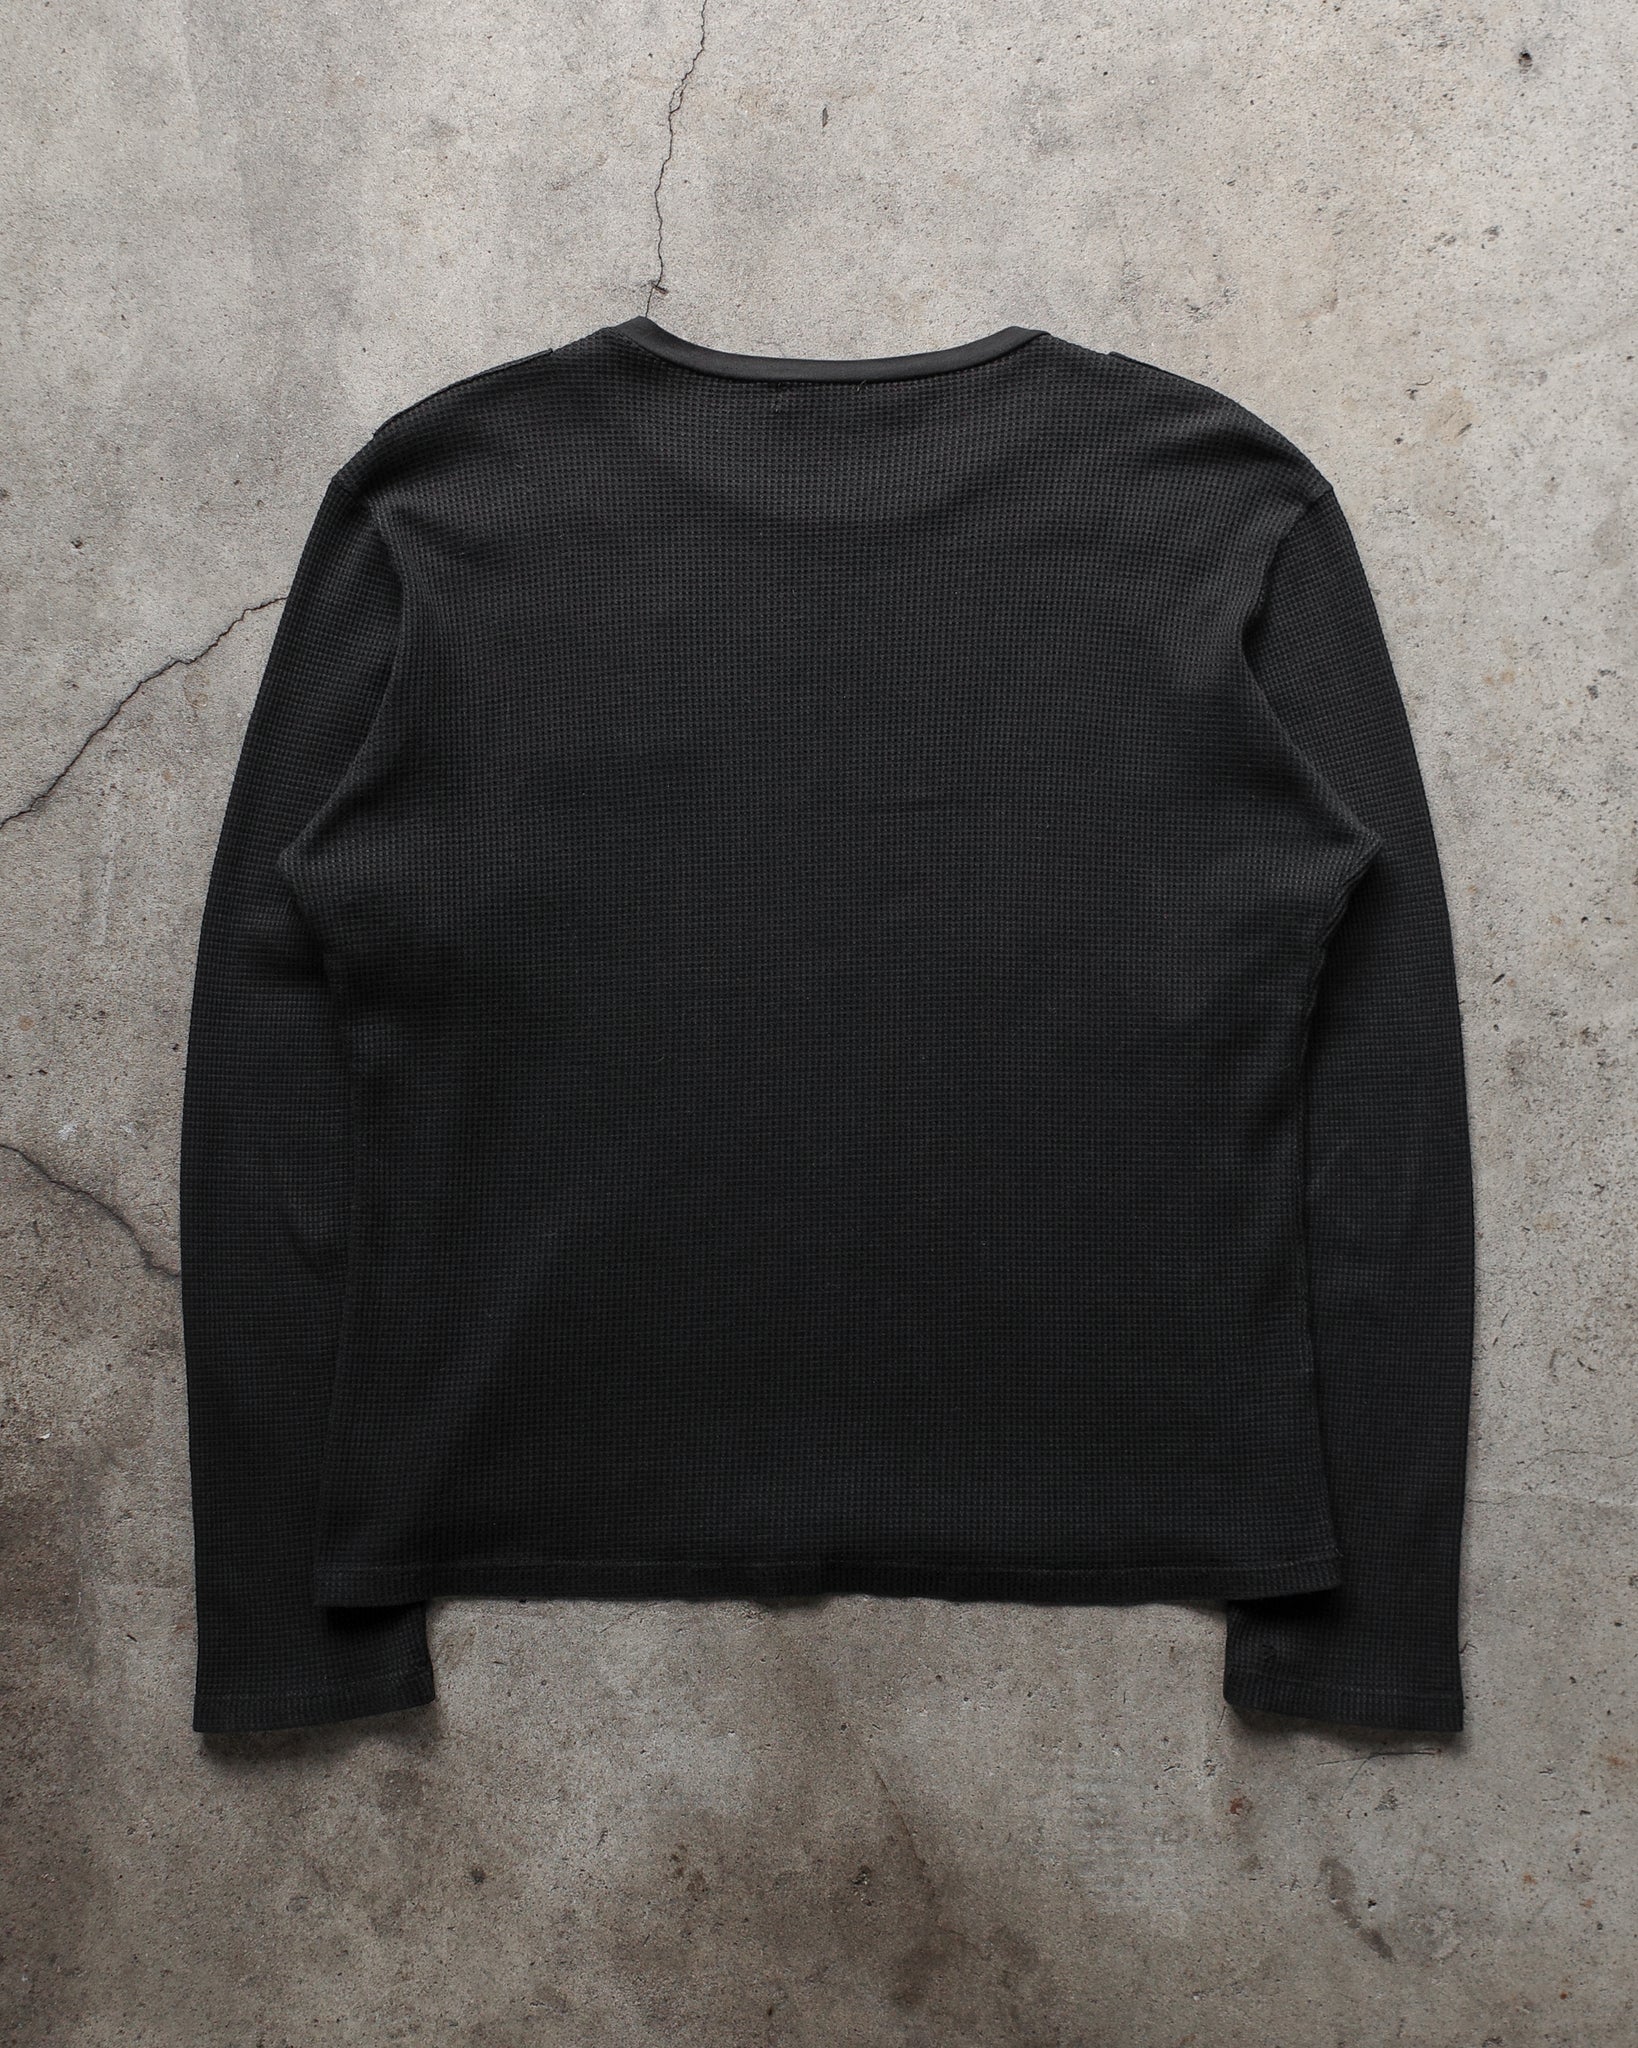 Helmut Lang AW98 Patched Waffle Knit Long Sleeve